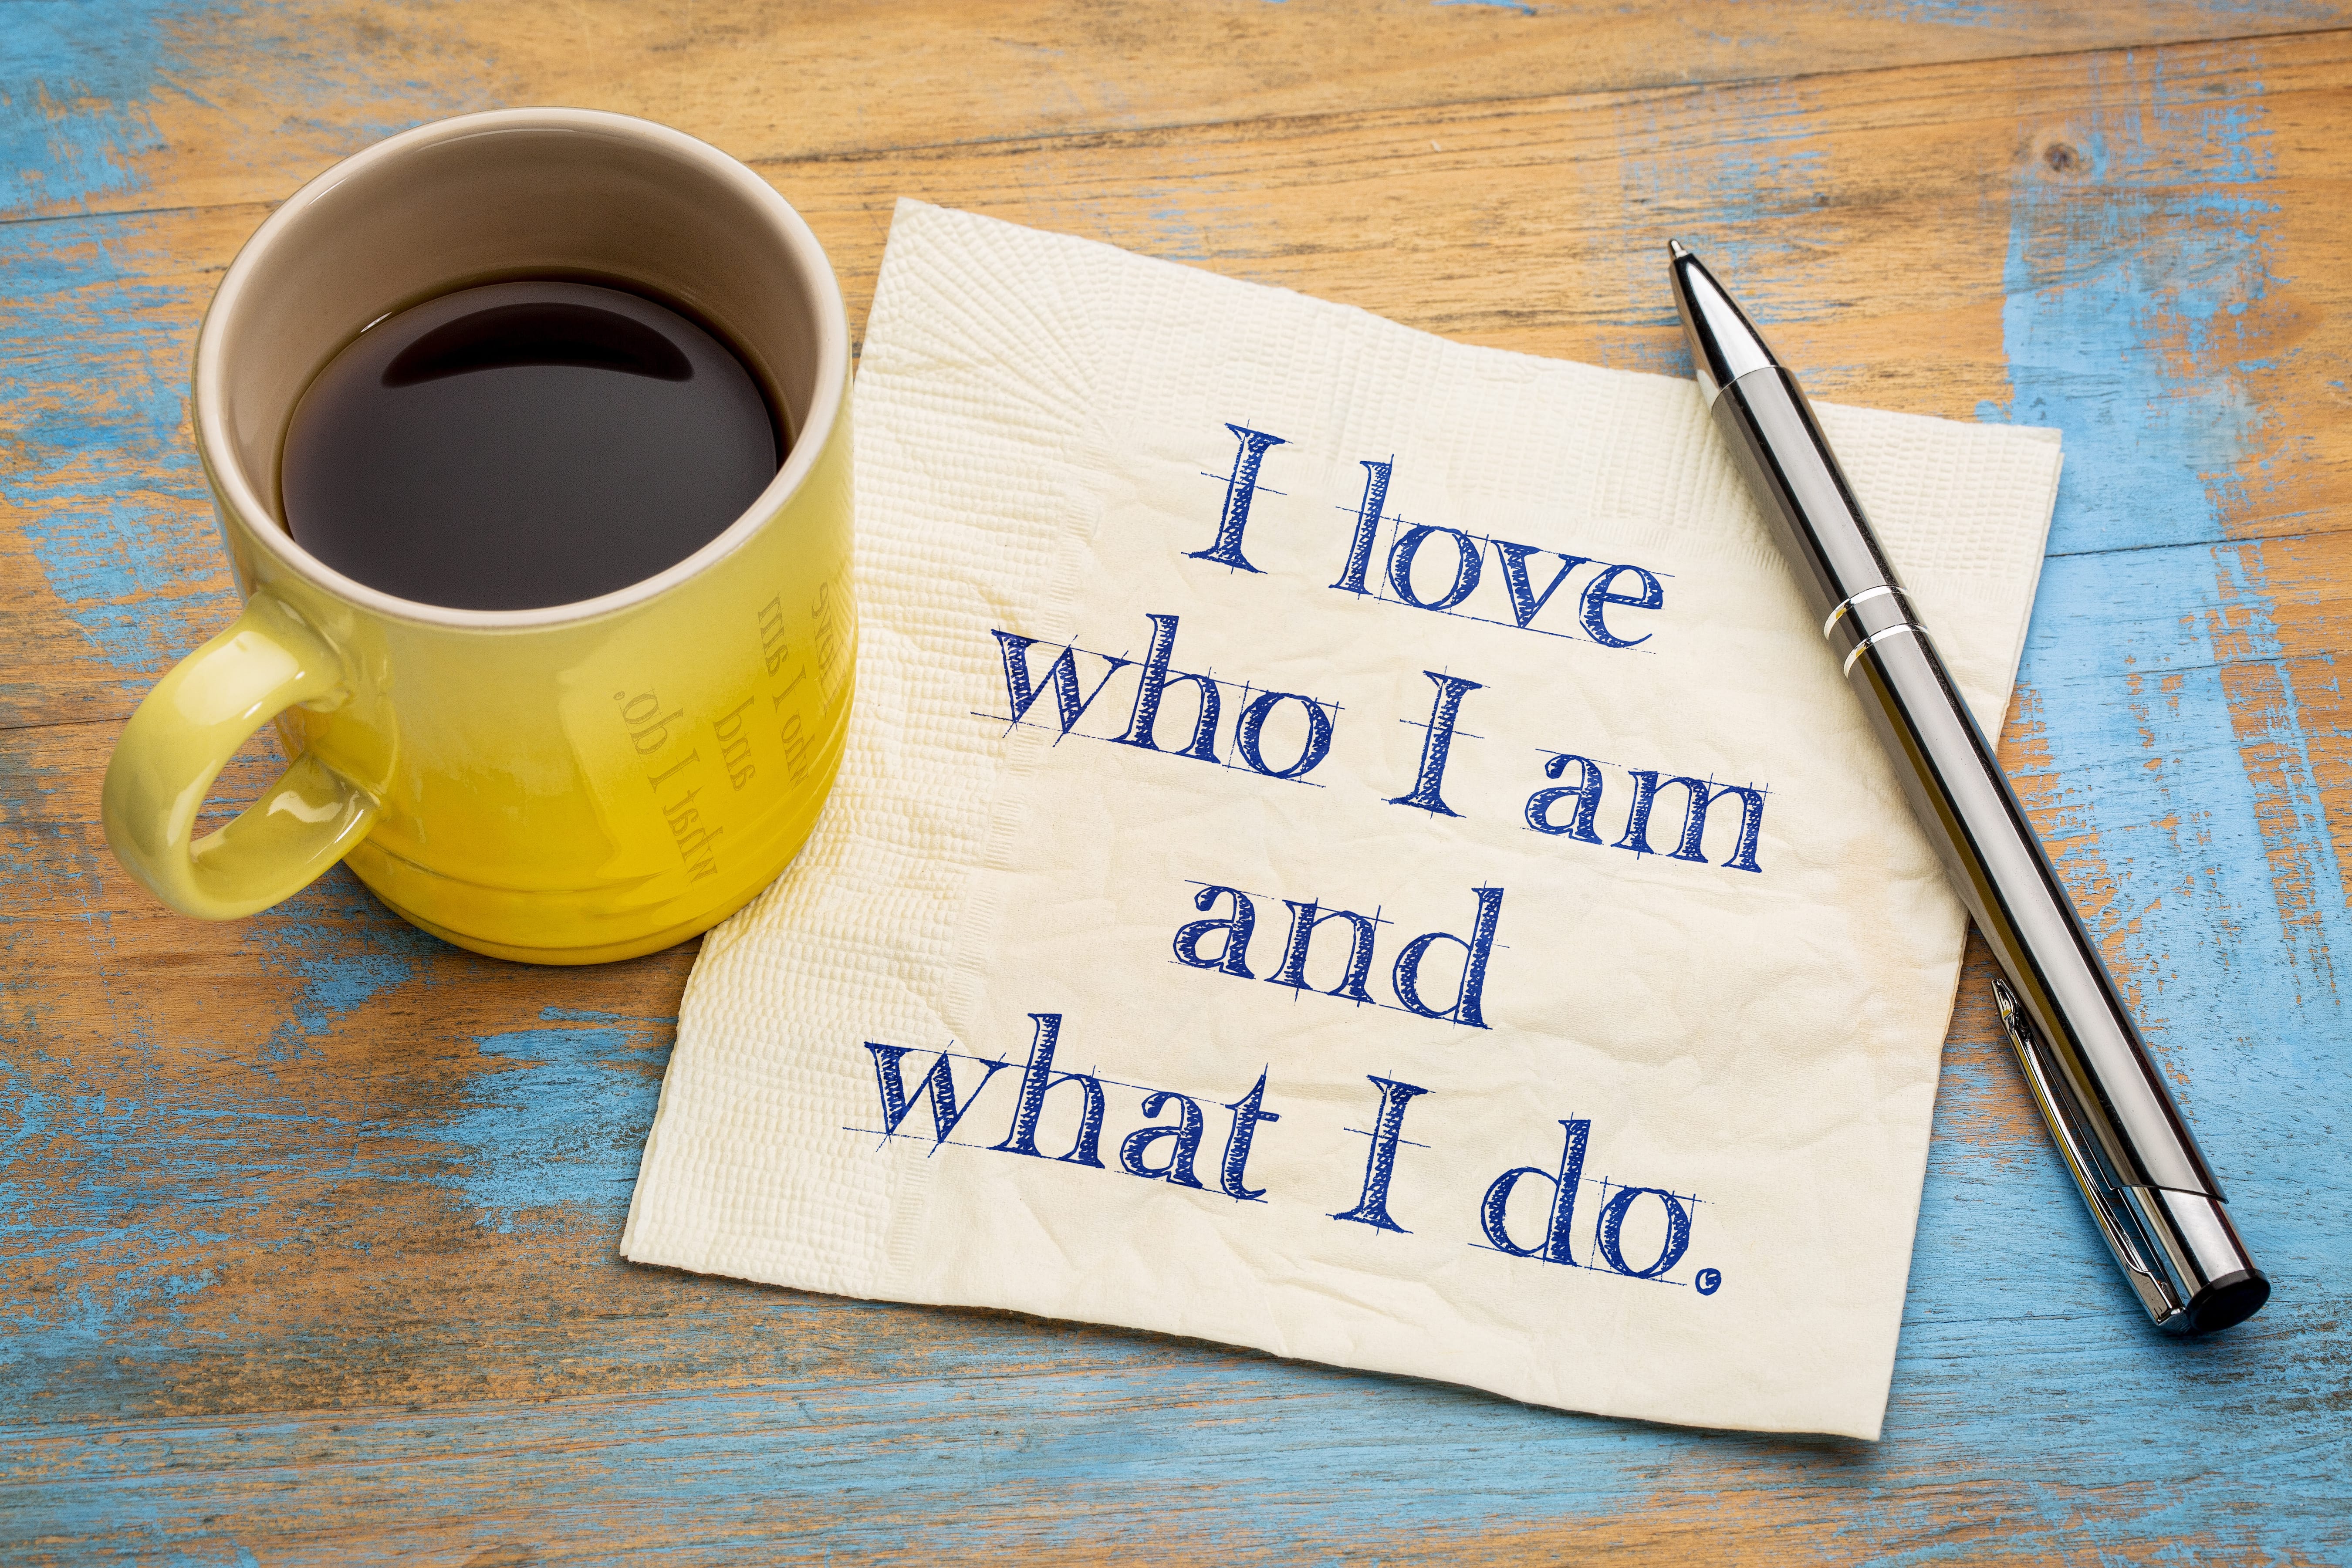 A yellow coffee cup on a blue-wash wooden surface beside a napkin with the positive affirmation I love who I am and what I do written on it.